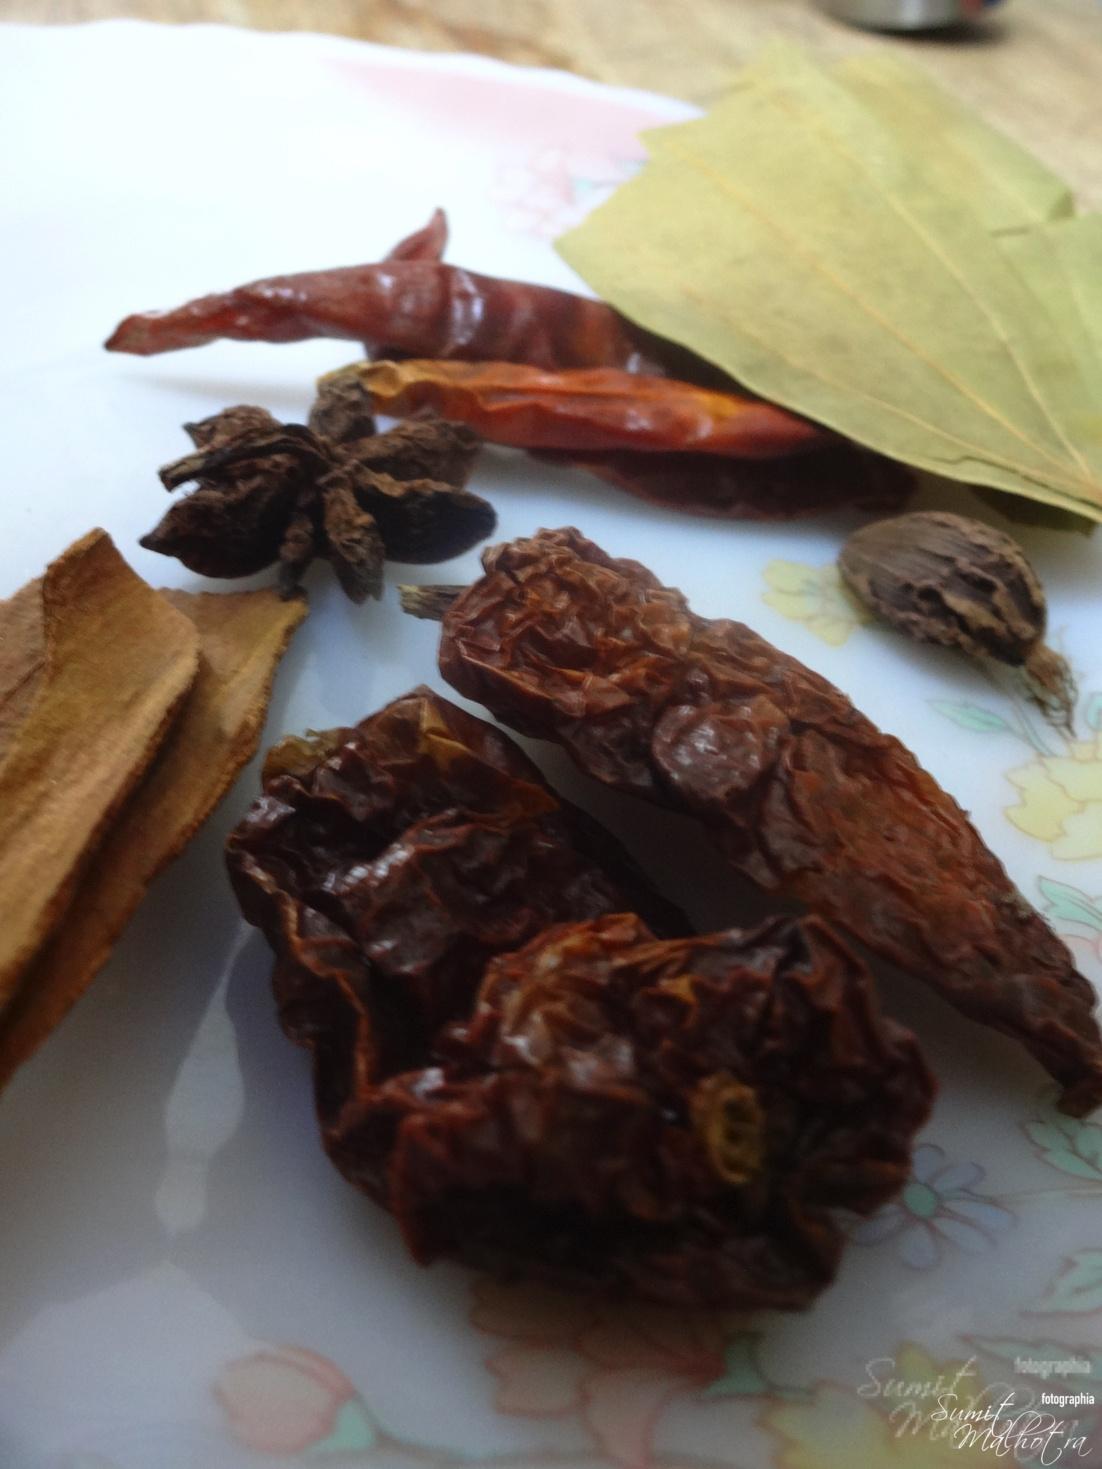 Whole spices with ghost chilli or bhut jolokia